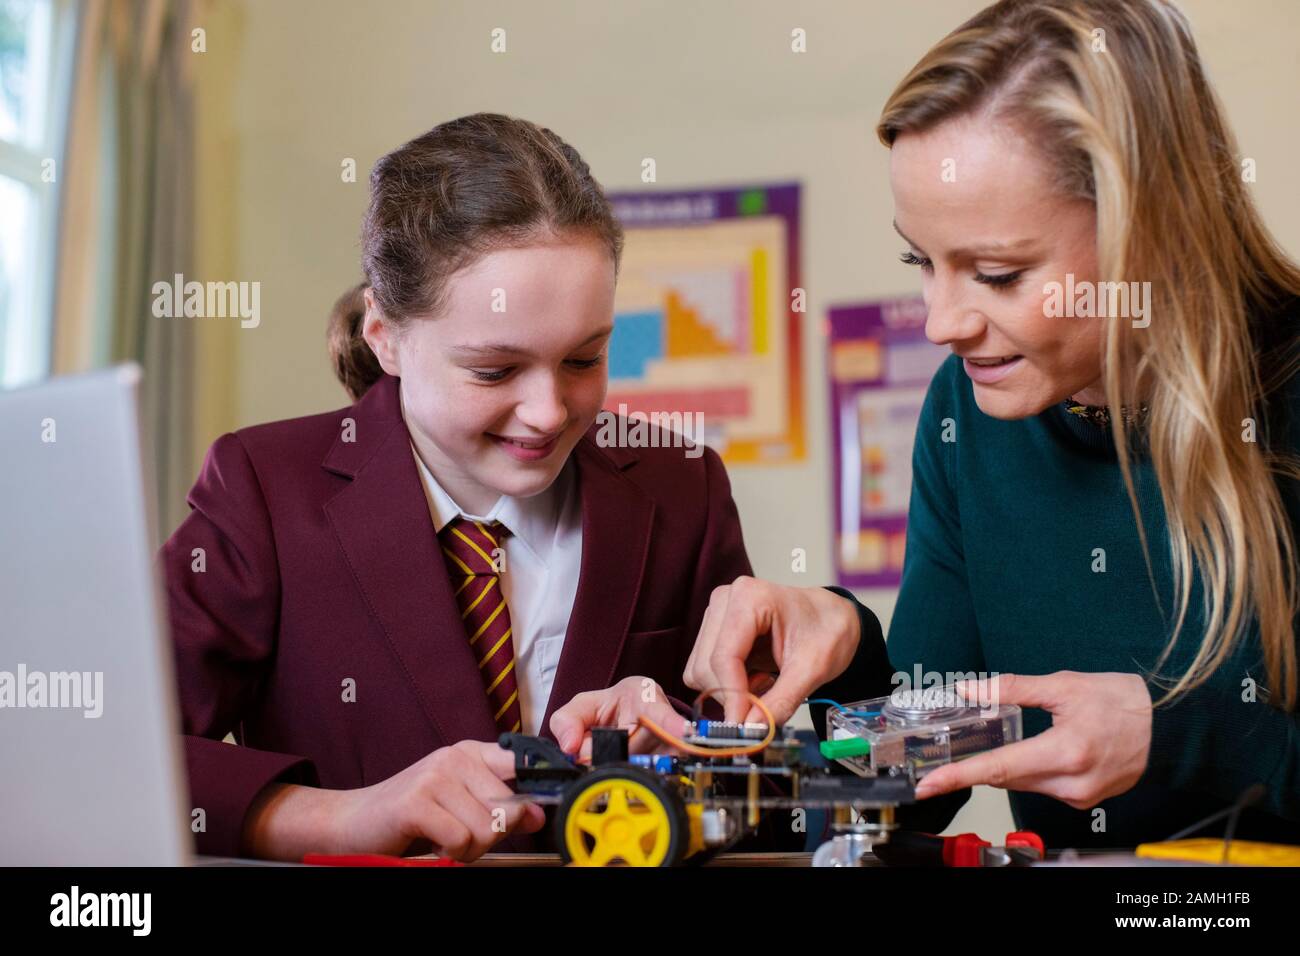 Teacher Helping Female Pupil Wearing Uniform To Build Robot Car In Science Lesson Stock Photo